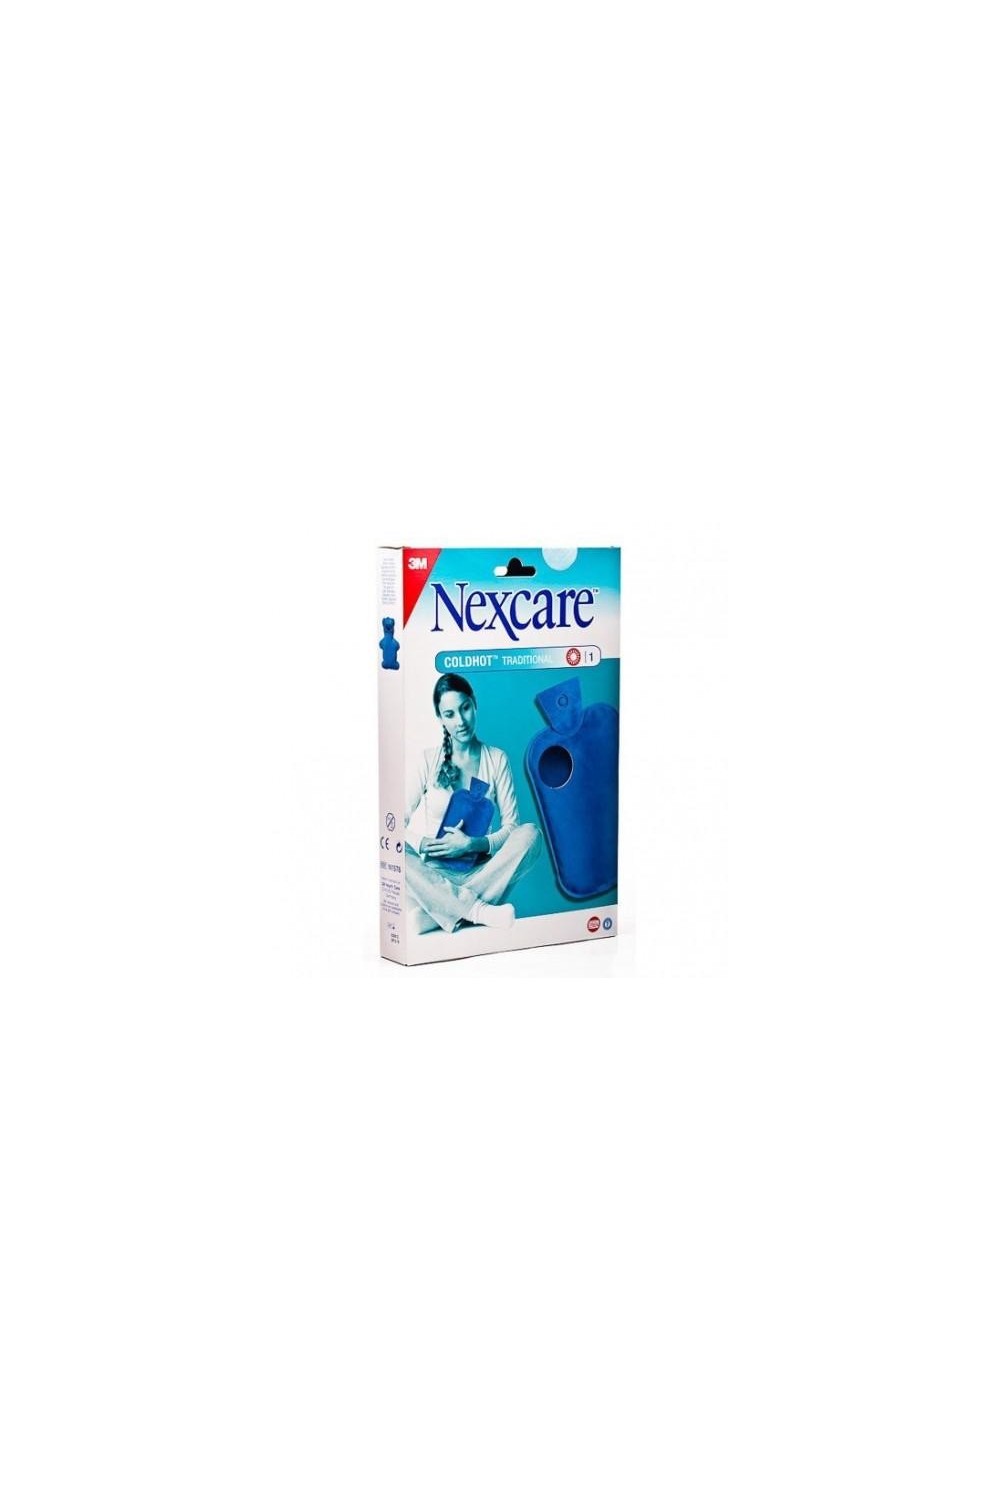 3m Nexcare™ Coldhot Traditional Hot Gel Bag 1pc